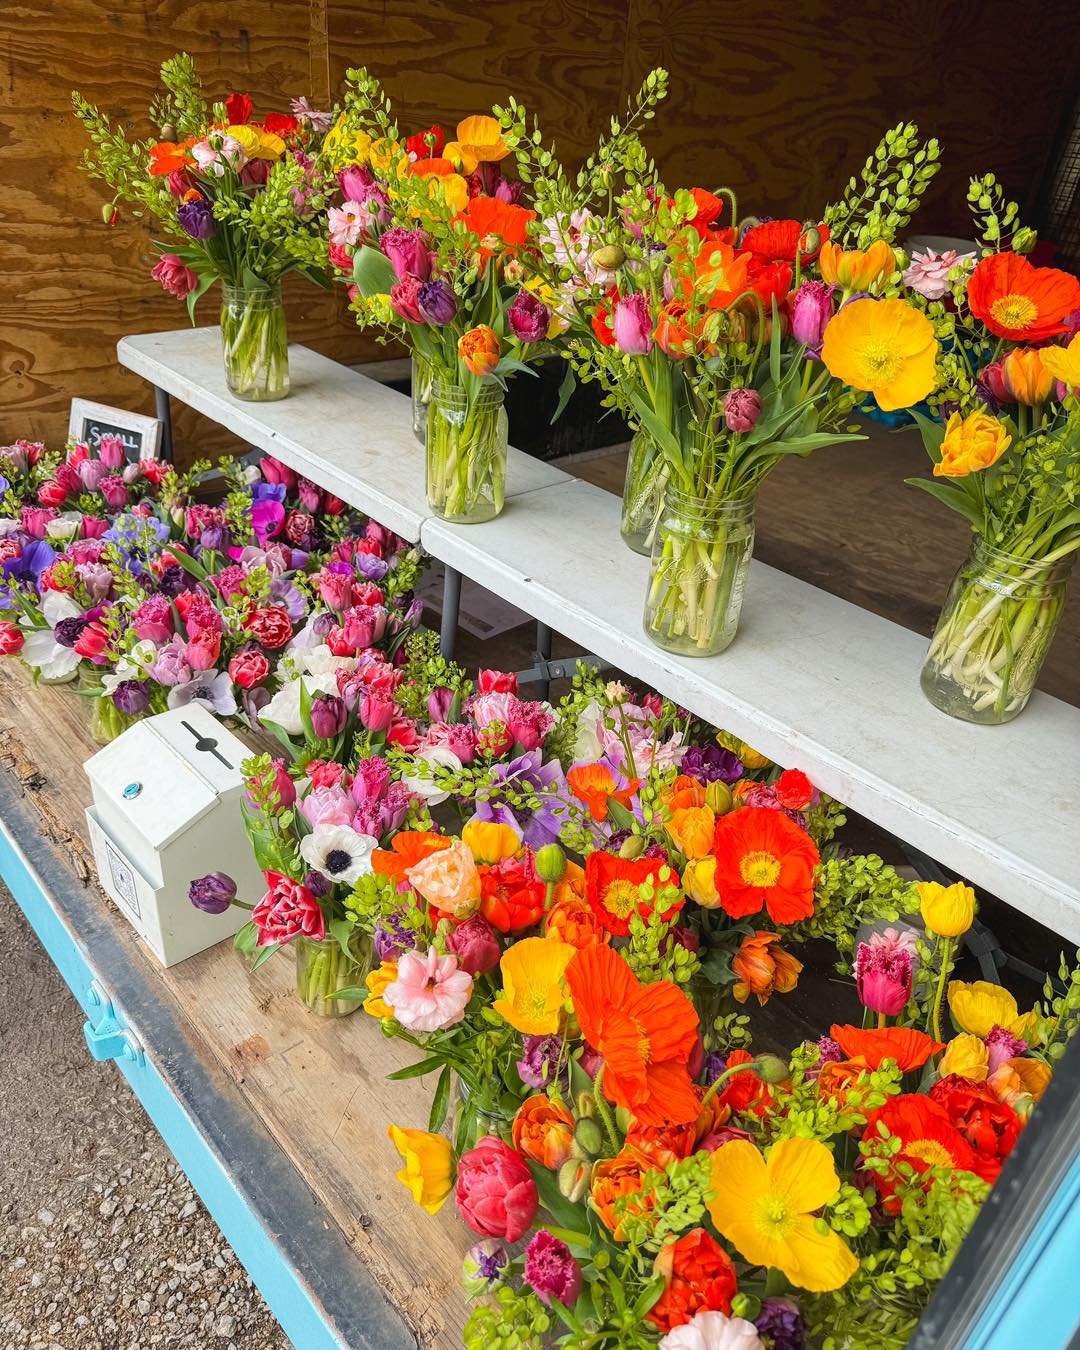 💐FARM STAND IS OPEN!!!💐

We are open today, Saturday, from 10am-2pm!  There&rsquo;s more up against the garage, as well, due to the wind! We have beautiful large and small mixed jars, fluffy tulip bunches, only a couple of ranunculus bunches, Icela